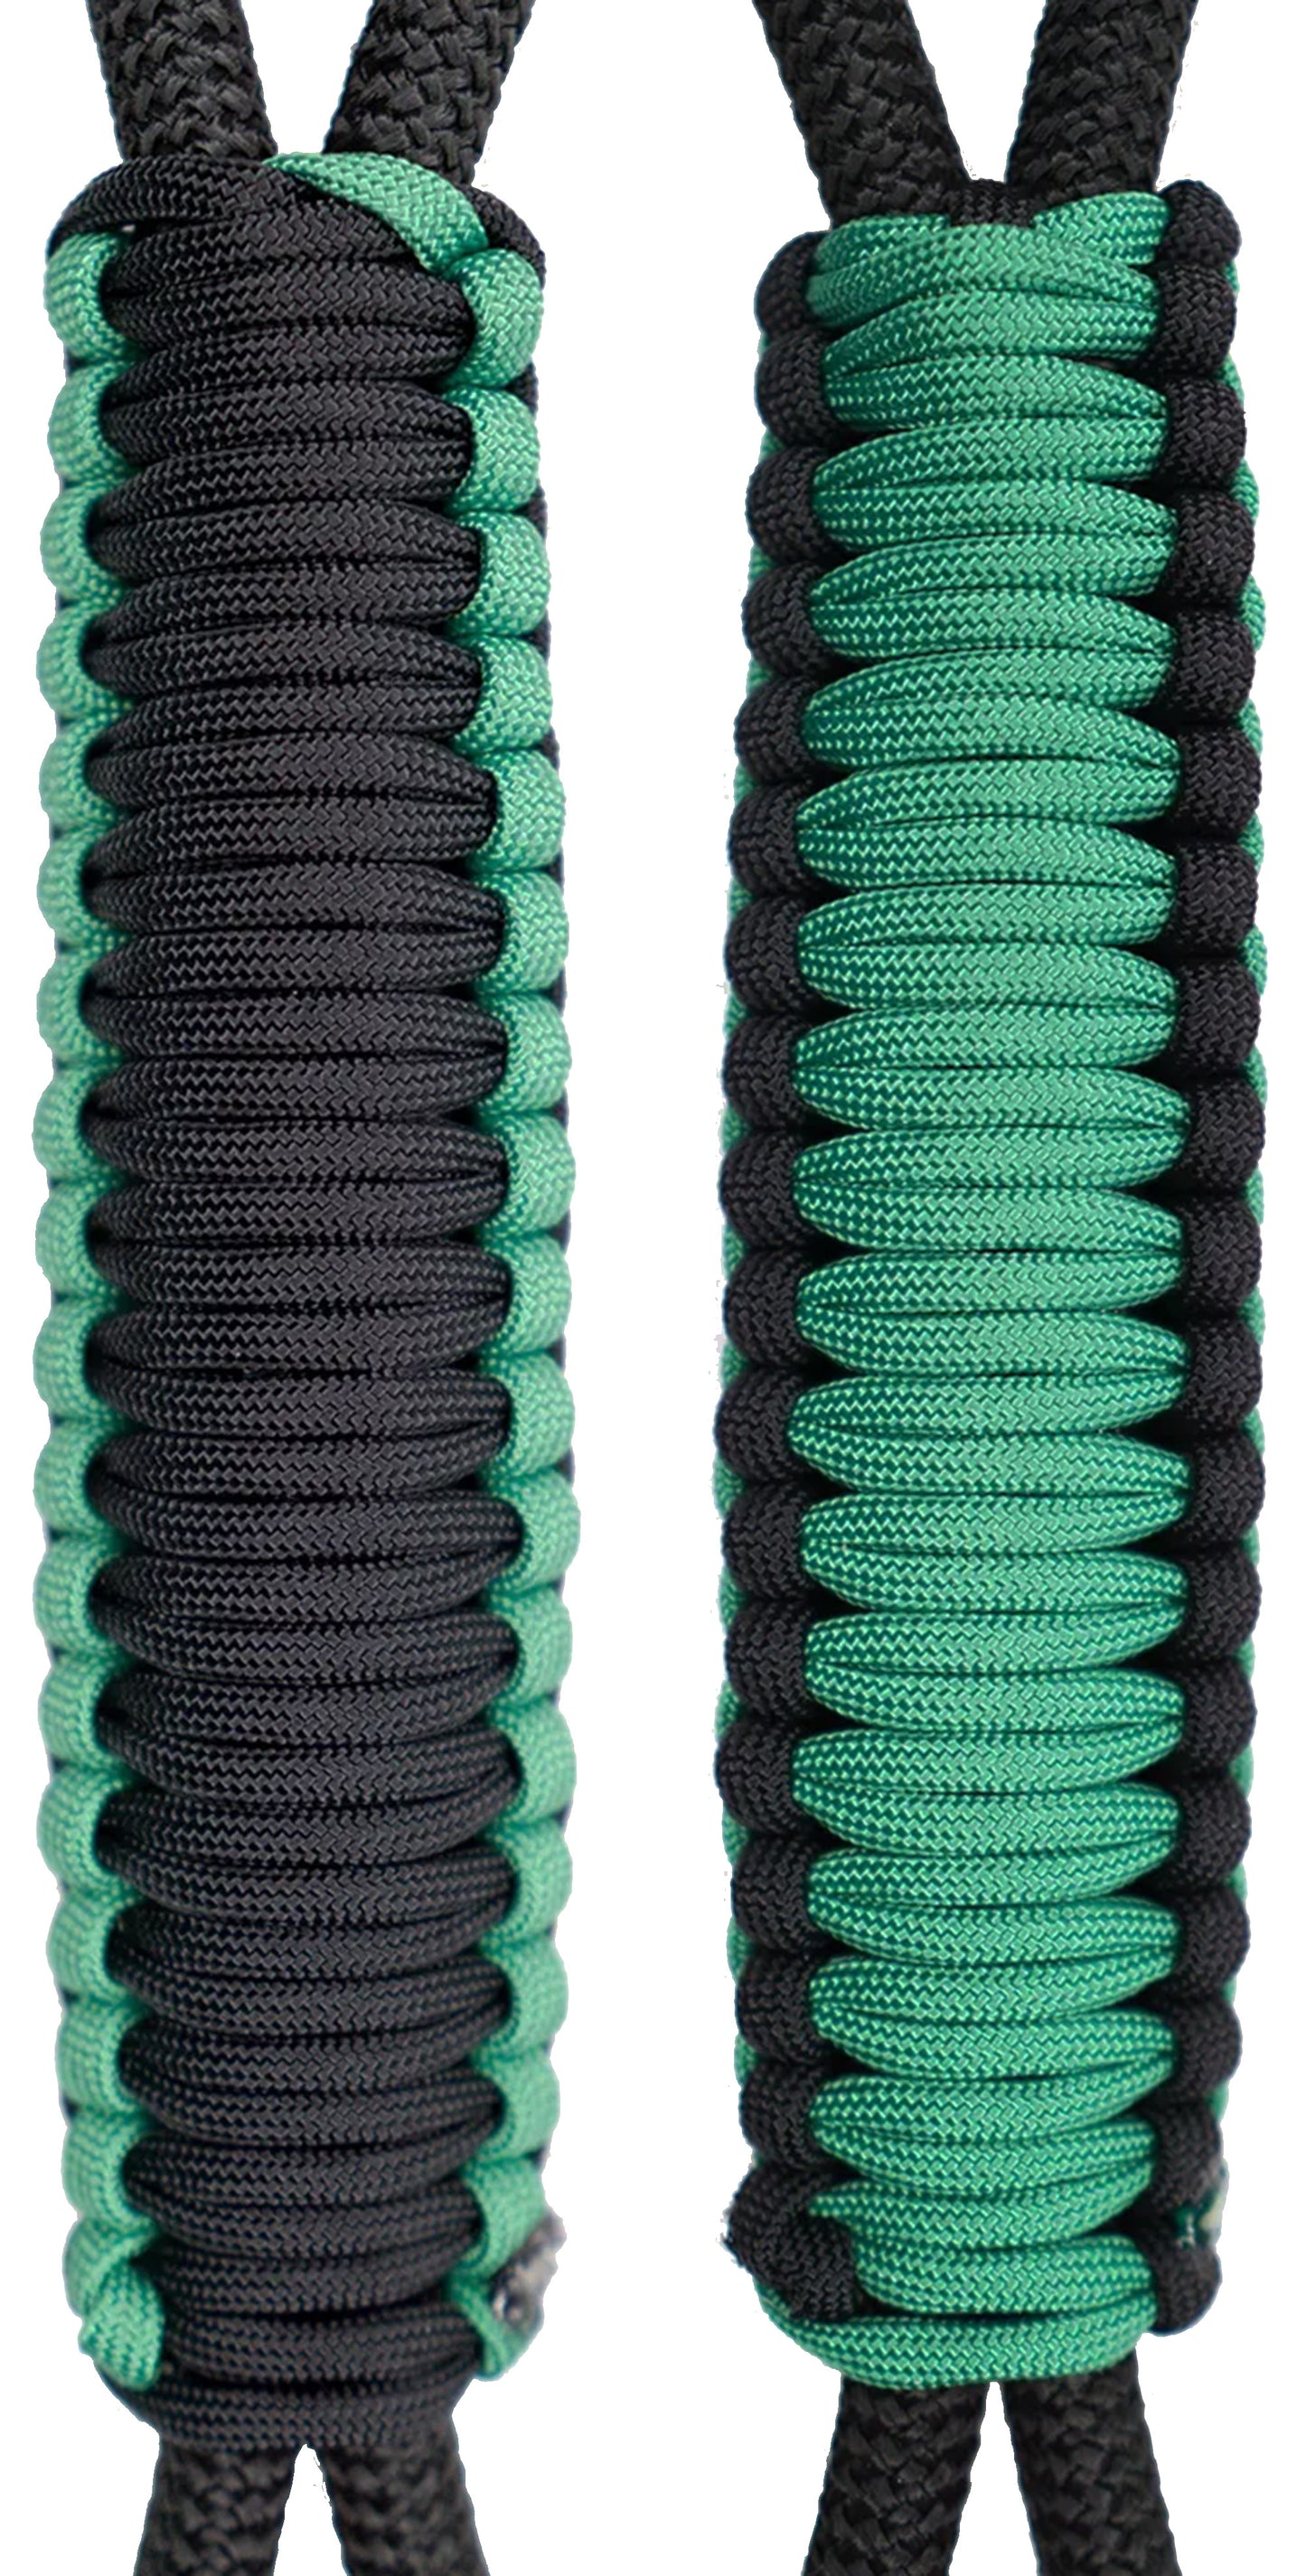 Black & Kelly Green -C031C019 - Paracord Handmade Handles for Stainless Steel Tumblers - Made in USA!